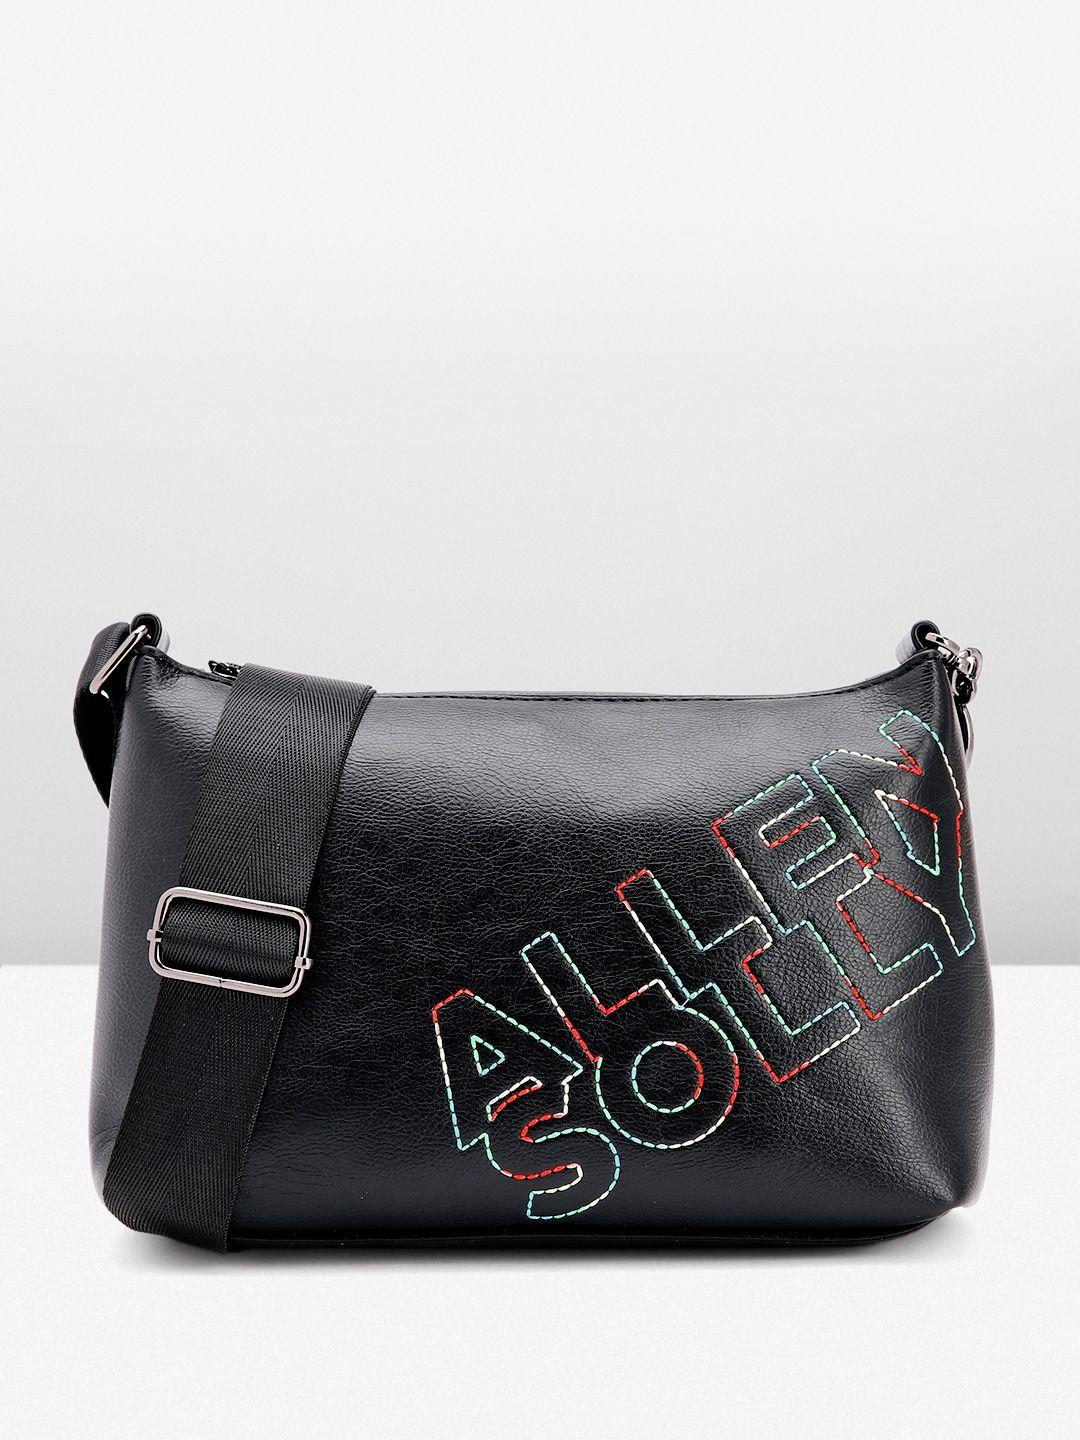 allen solly brand logo embroidered structured sling bag